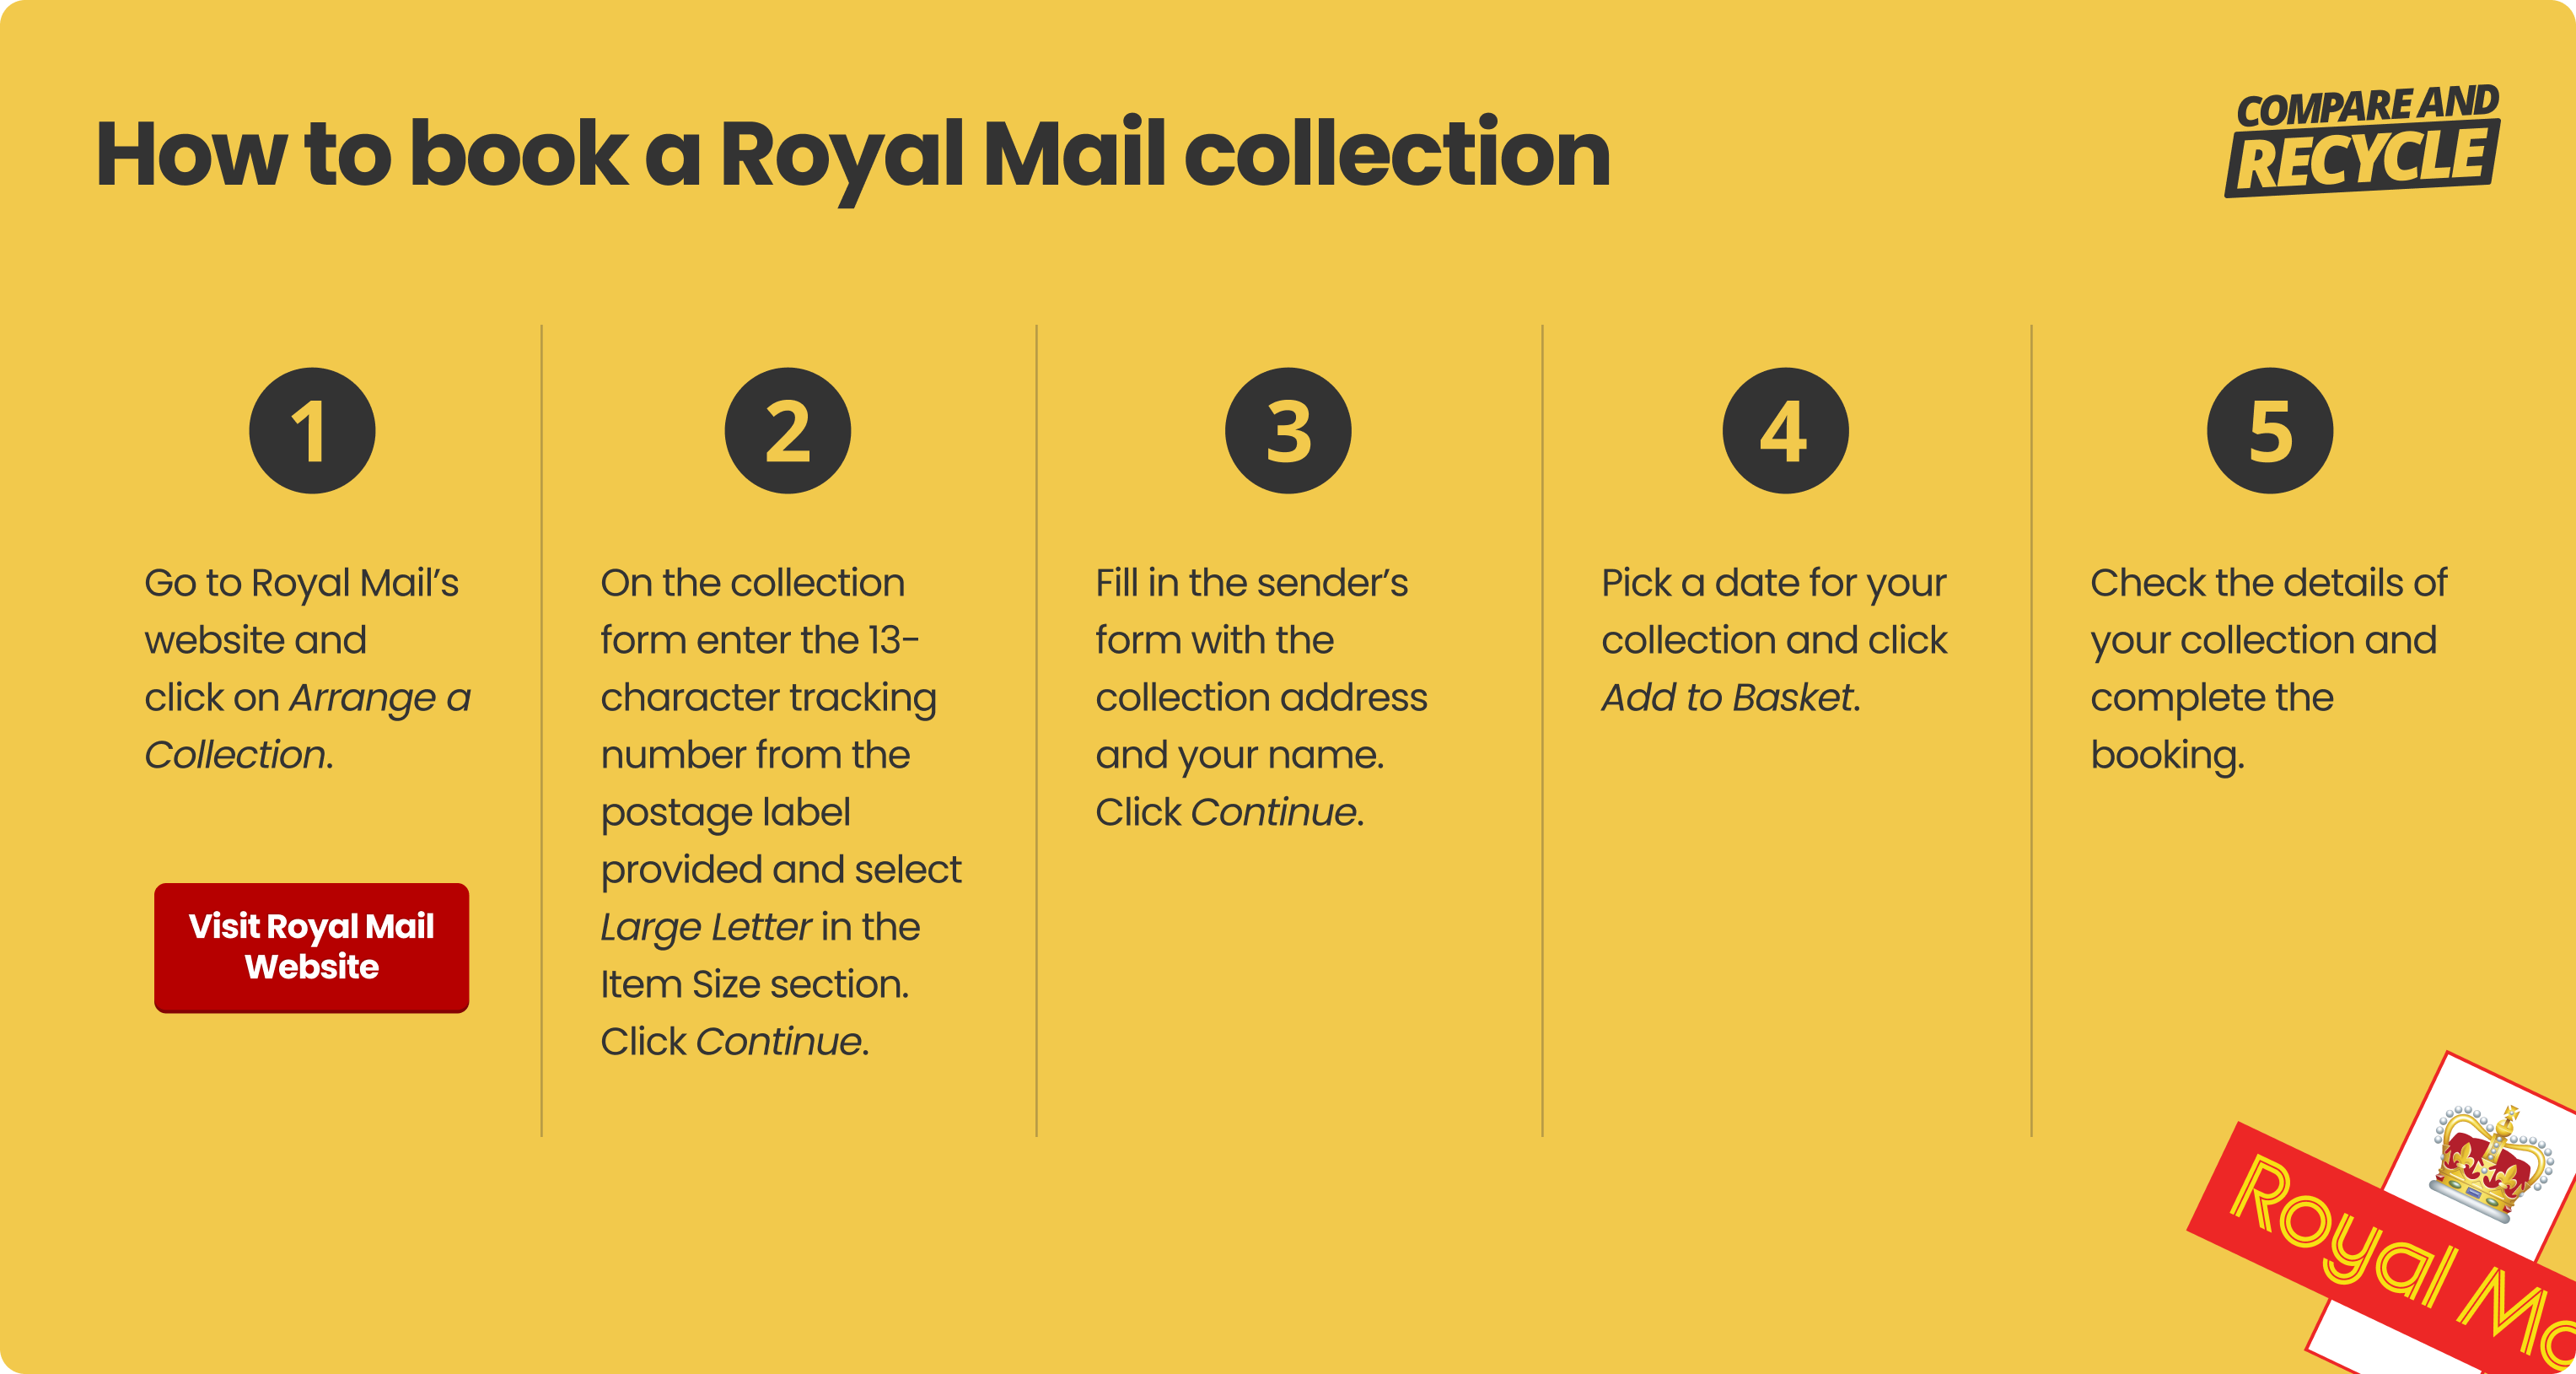 How To Book a Collection with Royal Mail